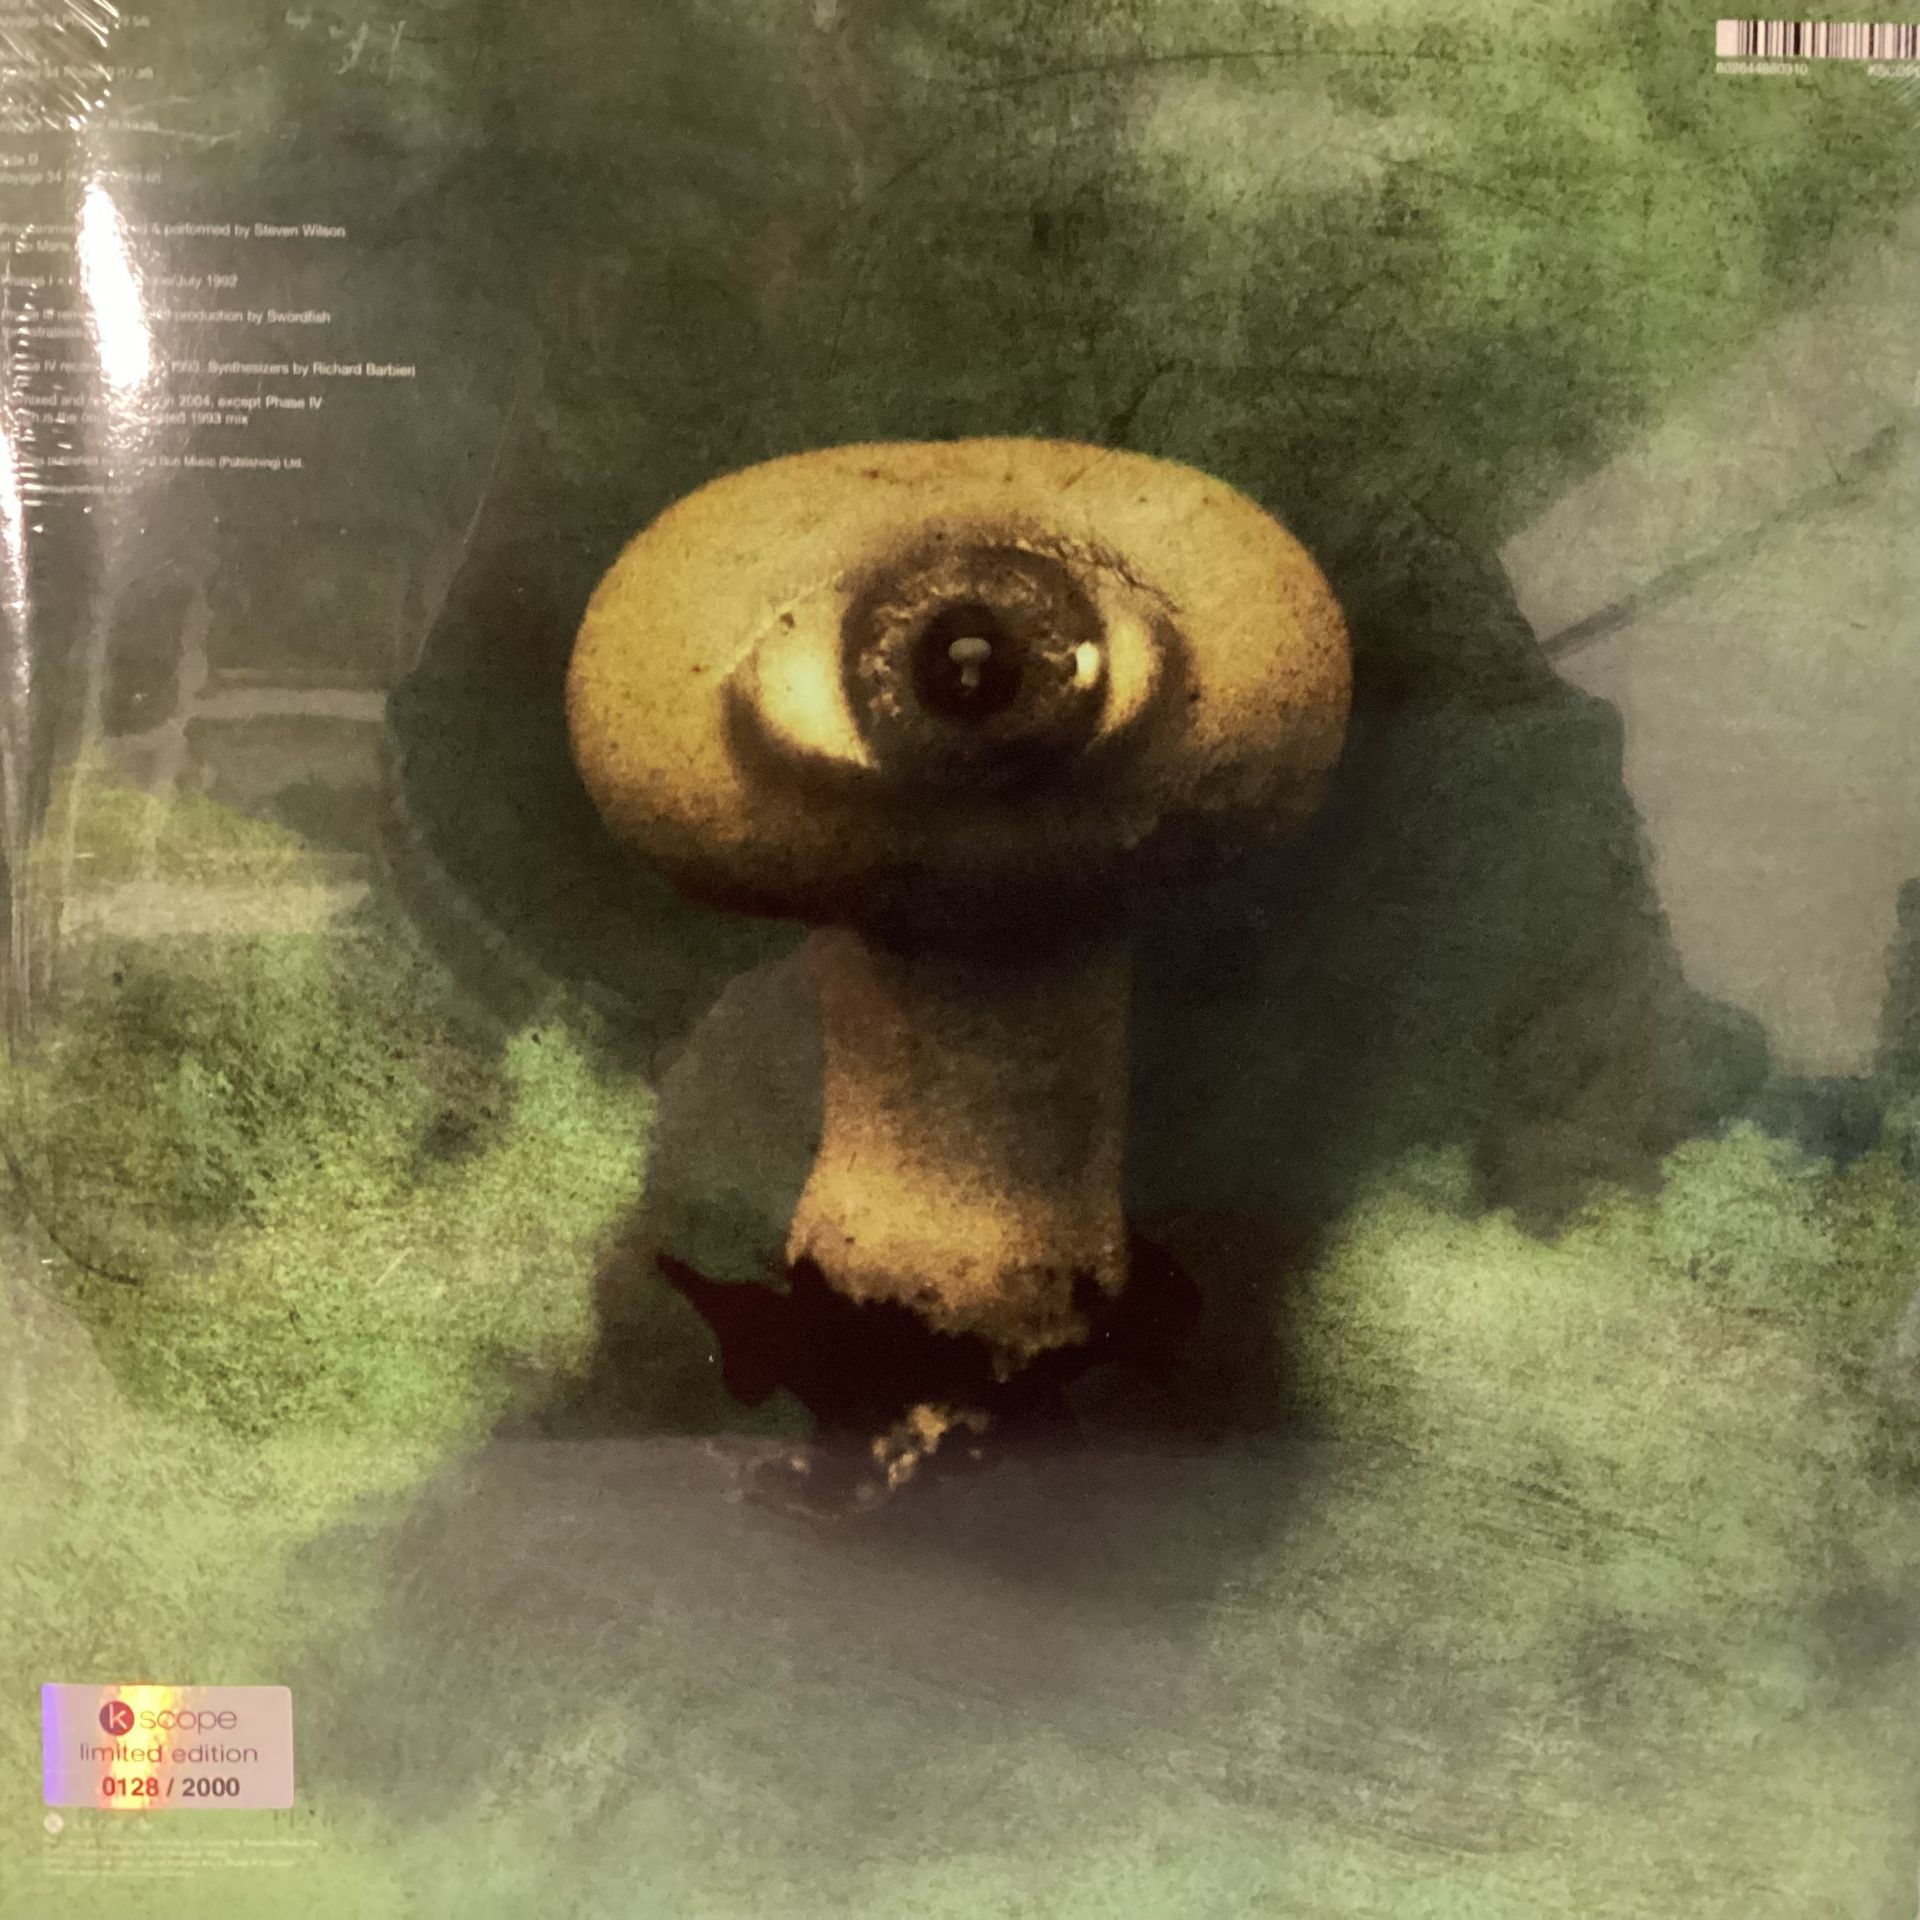 PORCUPINE TREE DOUBLE VINYL ALBUM 'VOYAGE 34'. This is a limited edition version from 2010 - Image 2 of 2